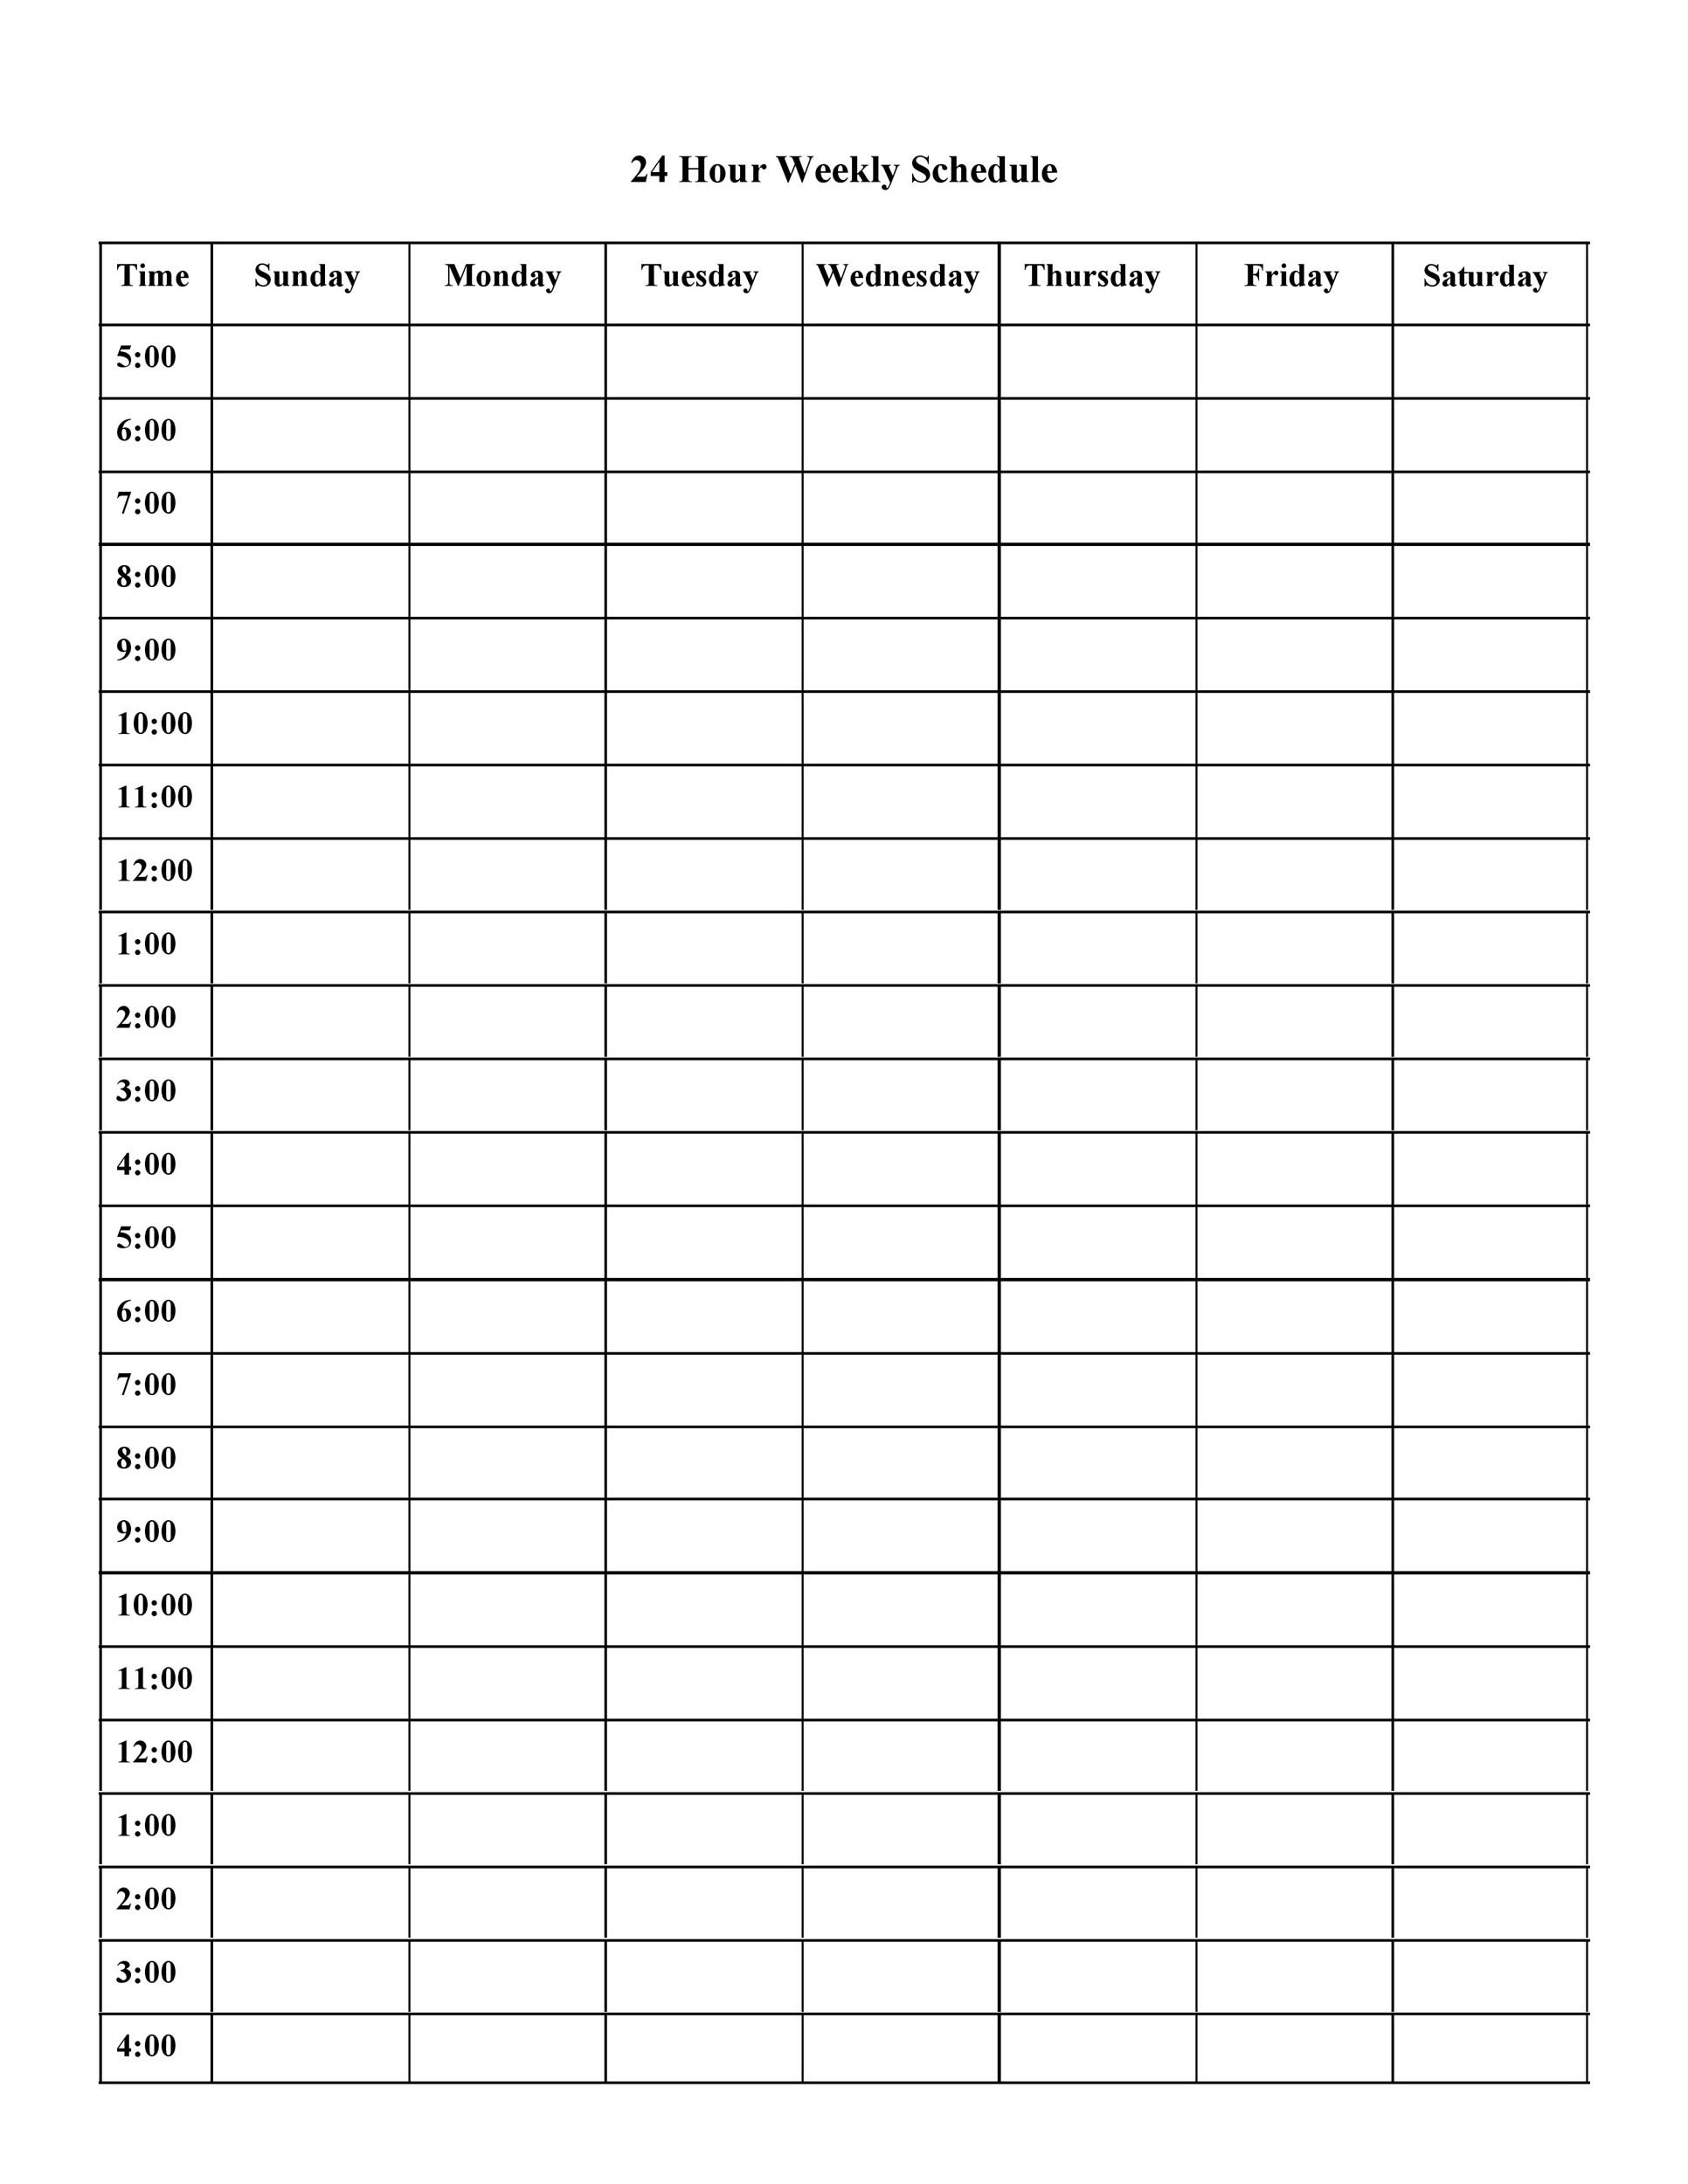 Hourly Schedule Template Printable